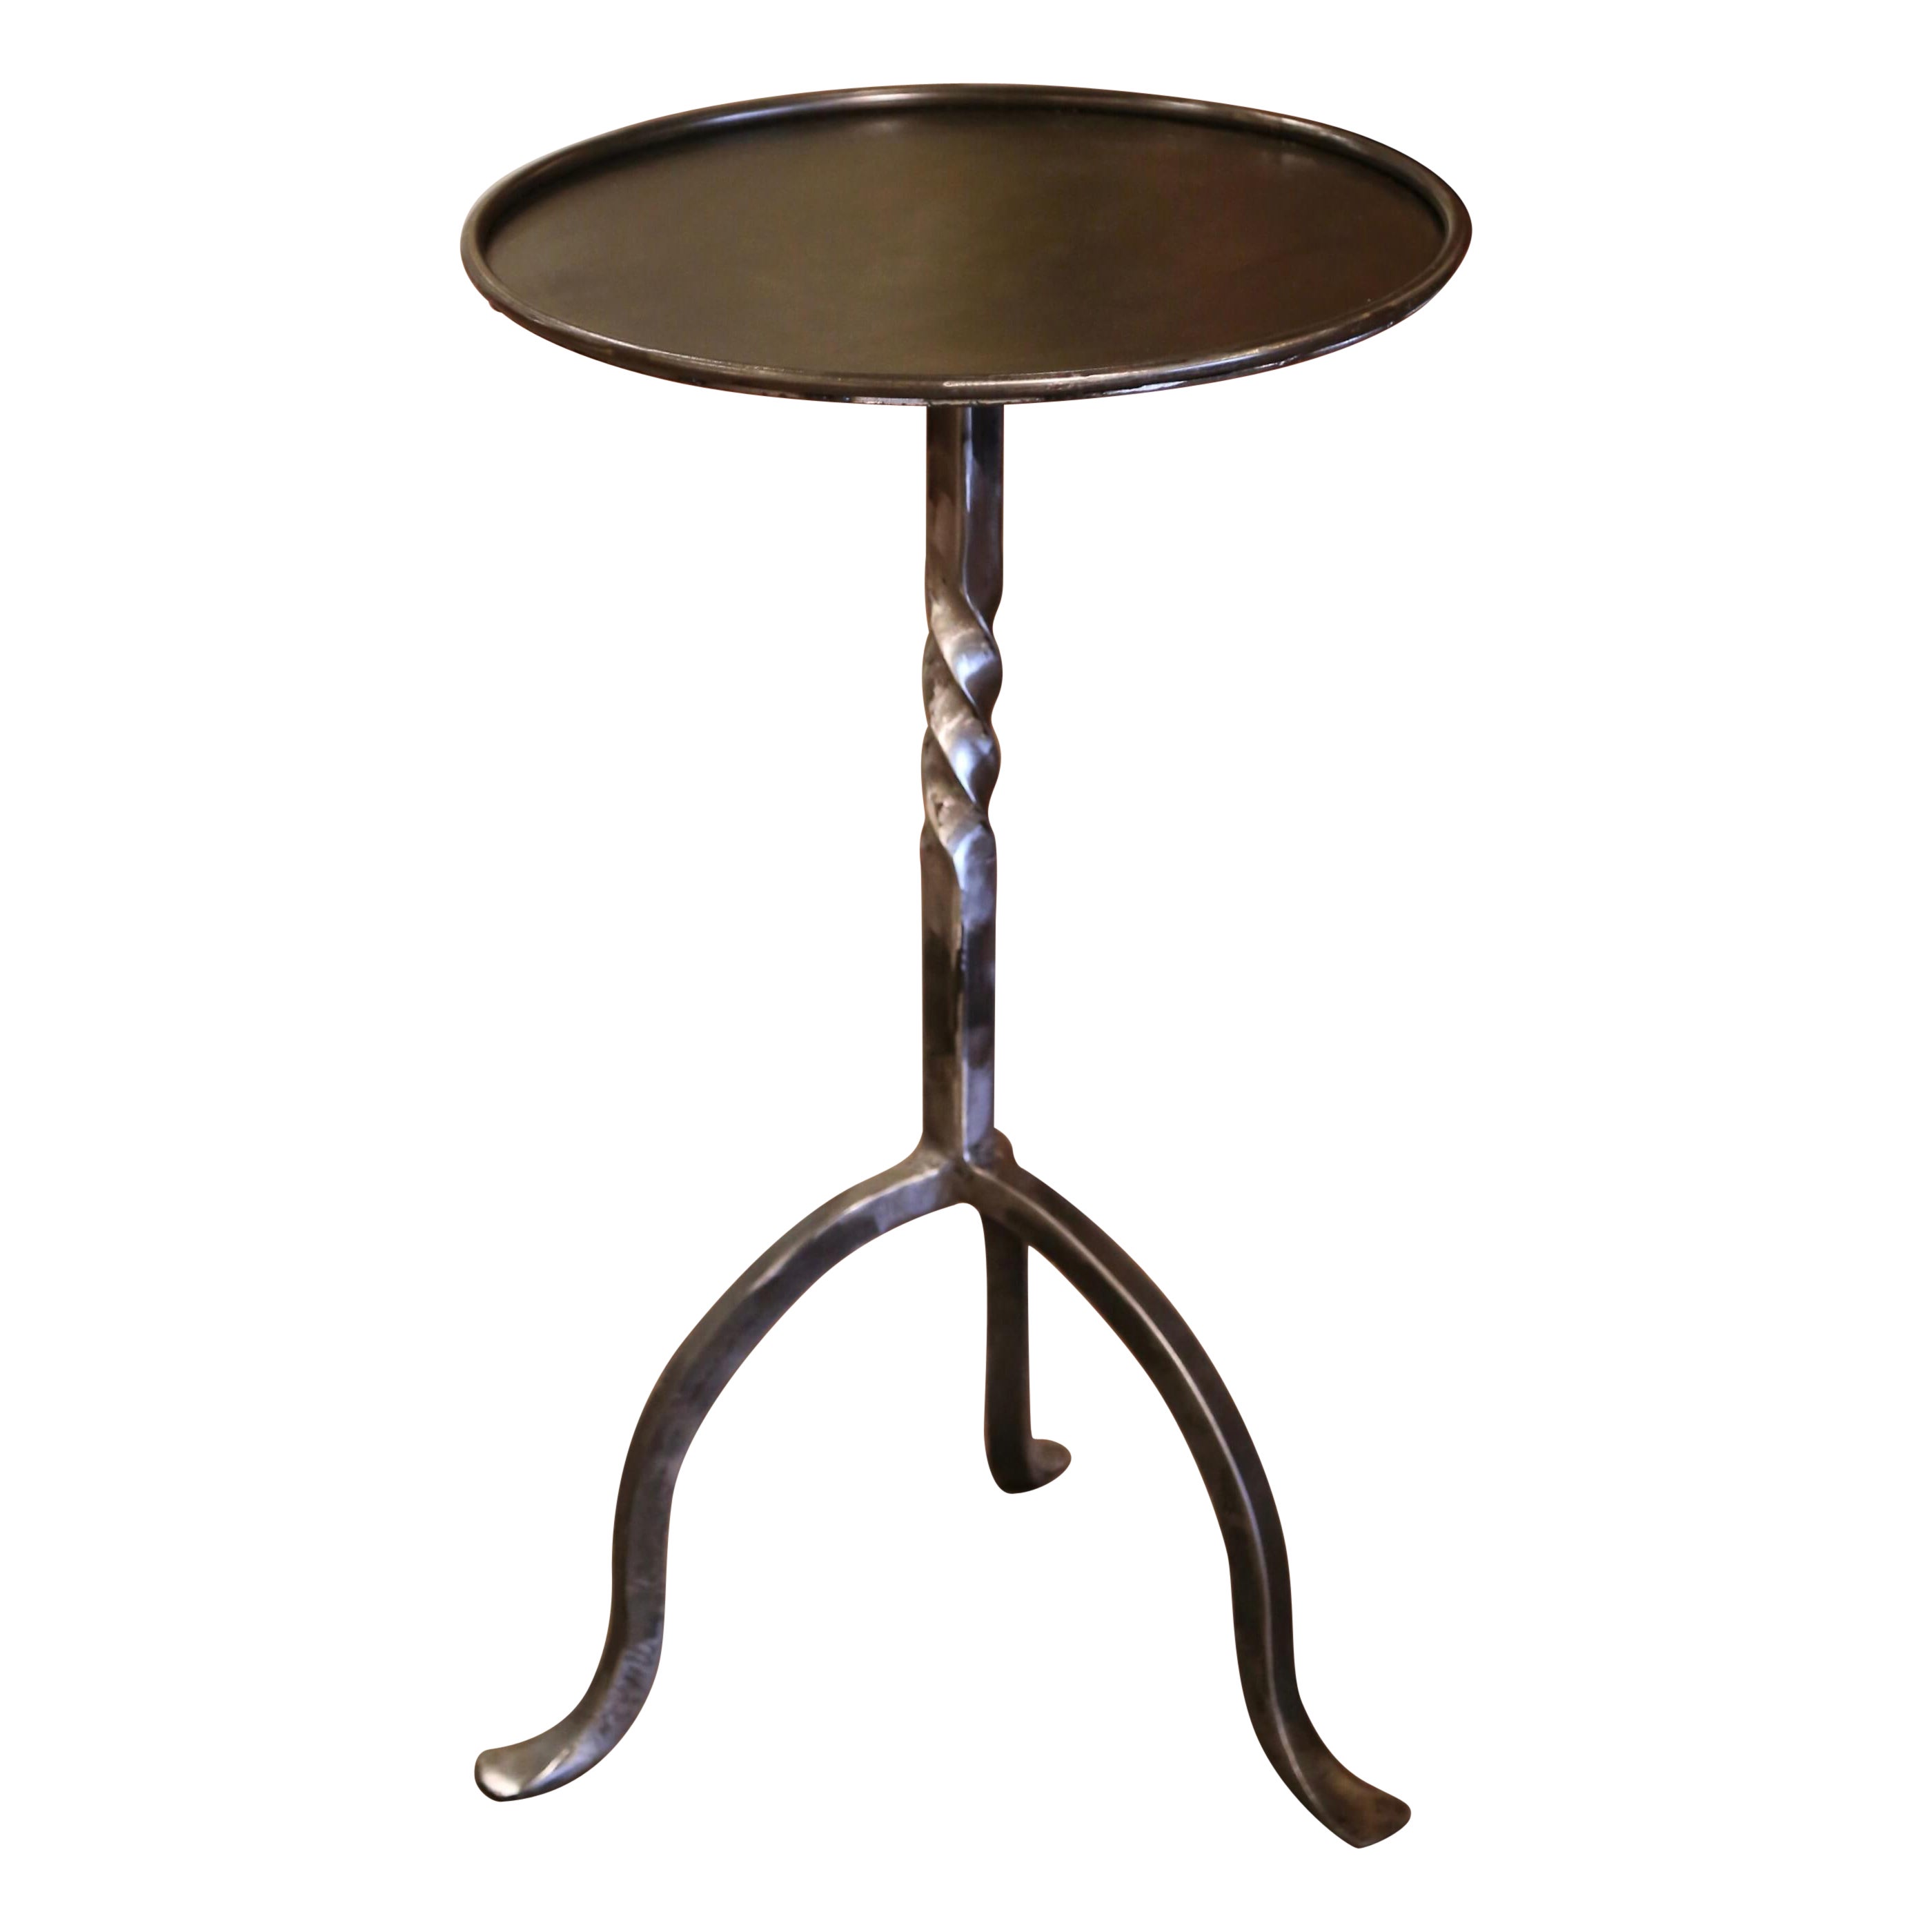 French Style Polished Wrought Iron Pedestal Martini Side Table